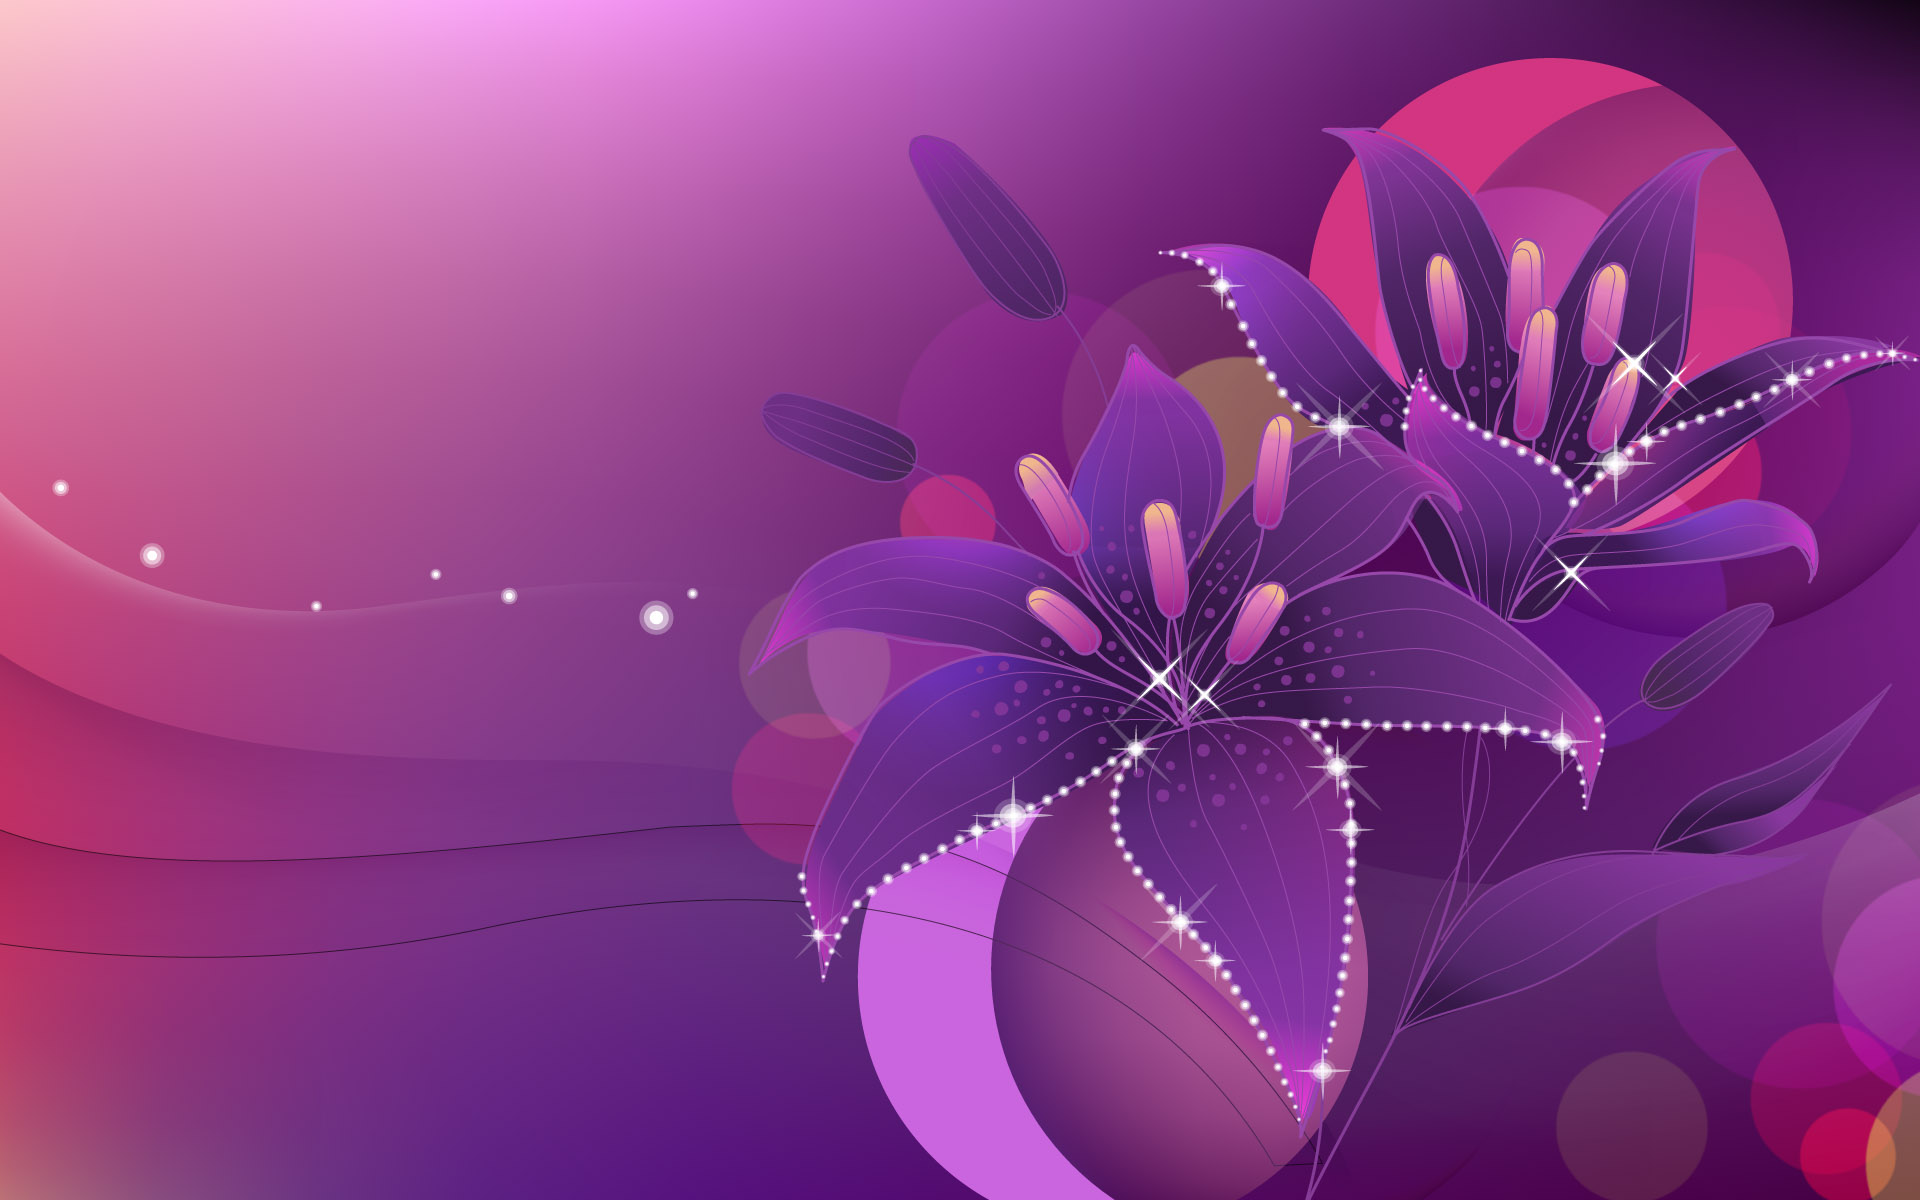 Abstract Flowers Purple Backgrounds Blogger wallpapers HD free